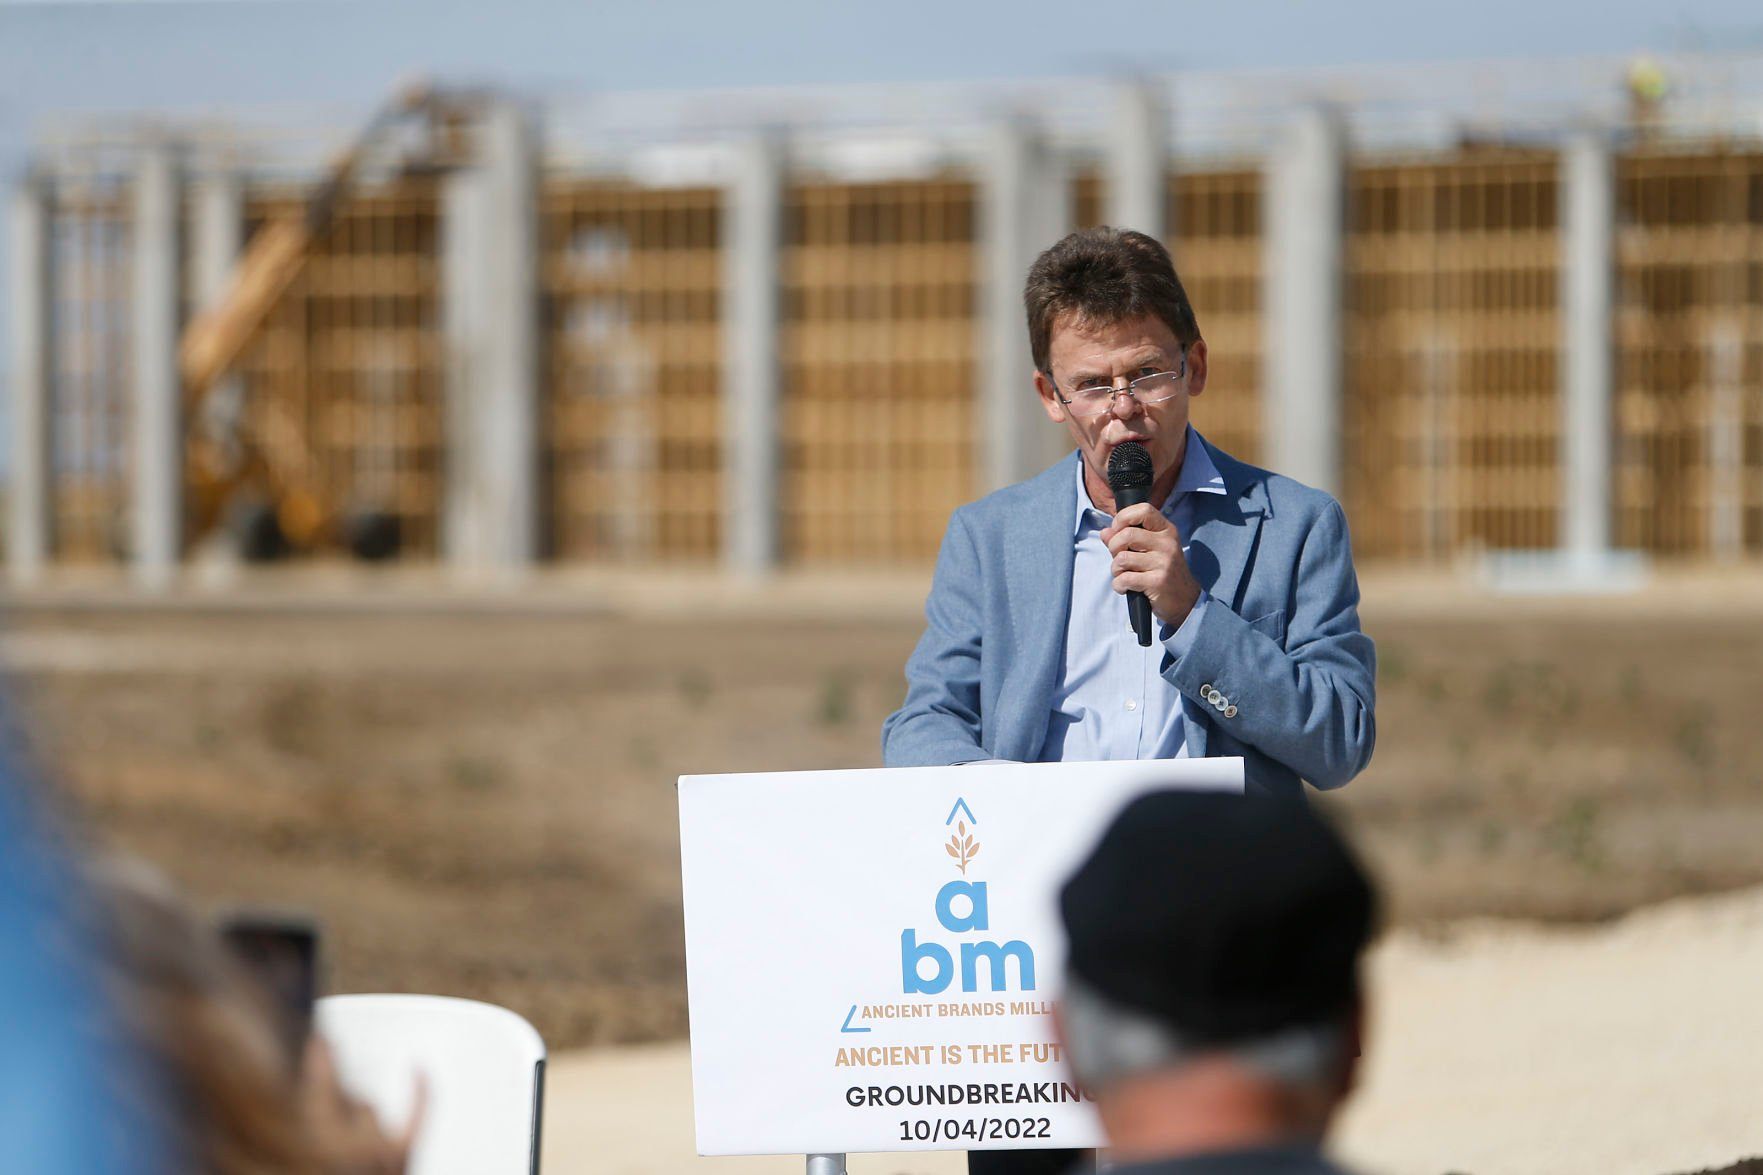 Wolfgang Buehler, co-owner of Ancient Brands Milling, speaks during a groundbreaking event on Tuesday, Oct. 4, 2022. The manufacturer, which makes organic and non-GMO puffed grains, has planned a $26.5 million, 92,000-square-foot project in Dyersville’s 20 West Industrial Park.    PHOTO CREDIT: Dave Kettering